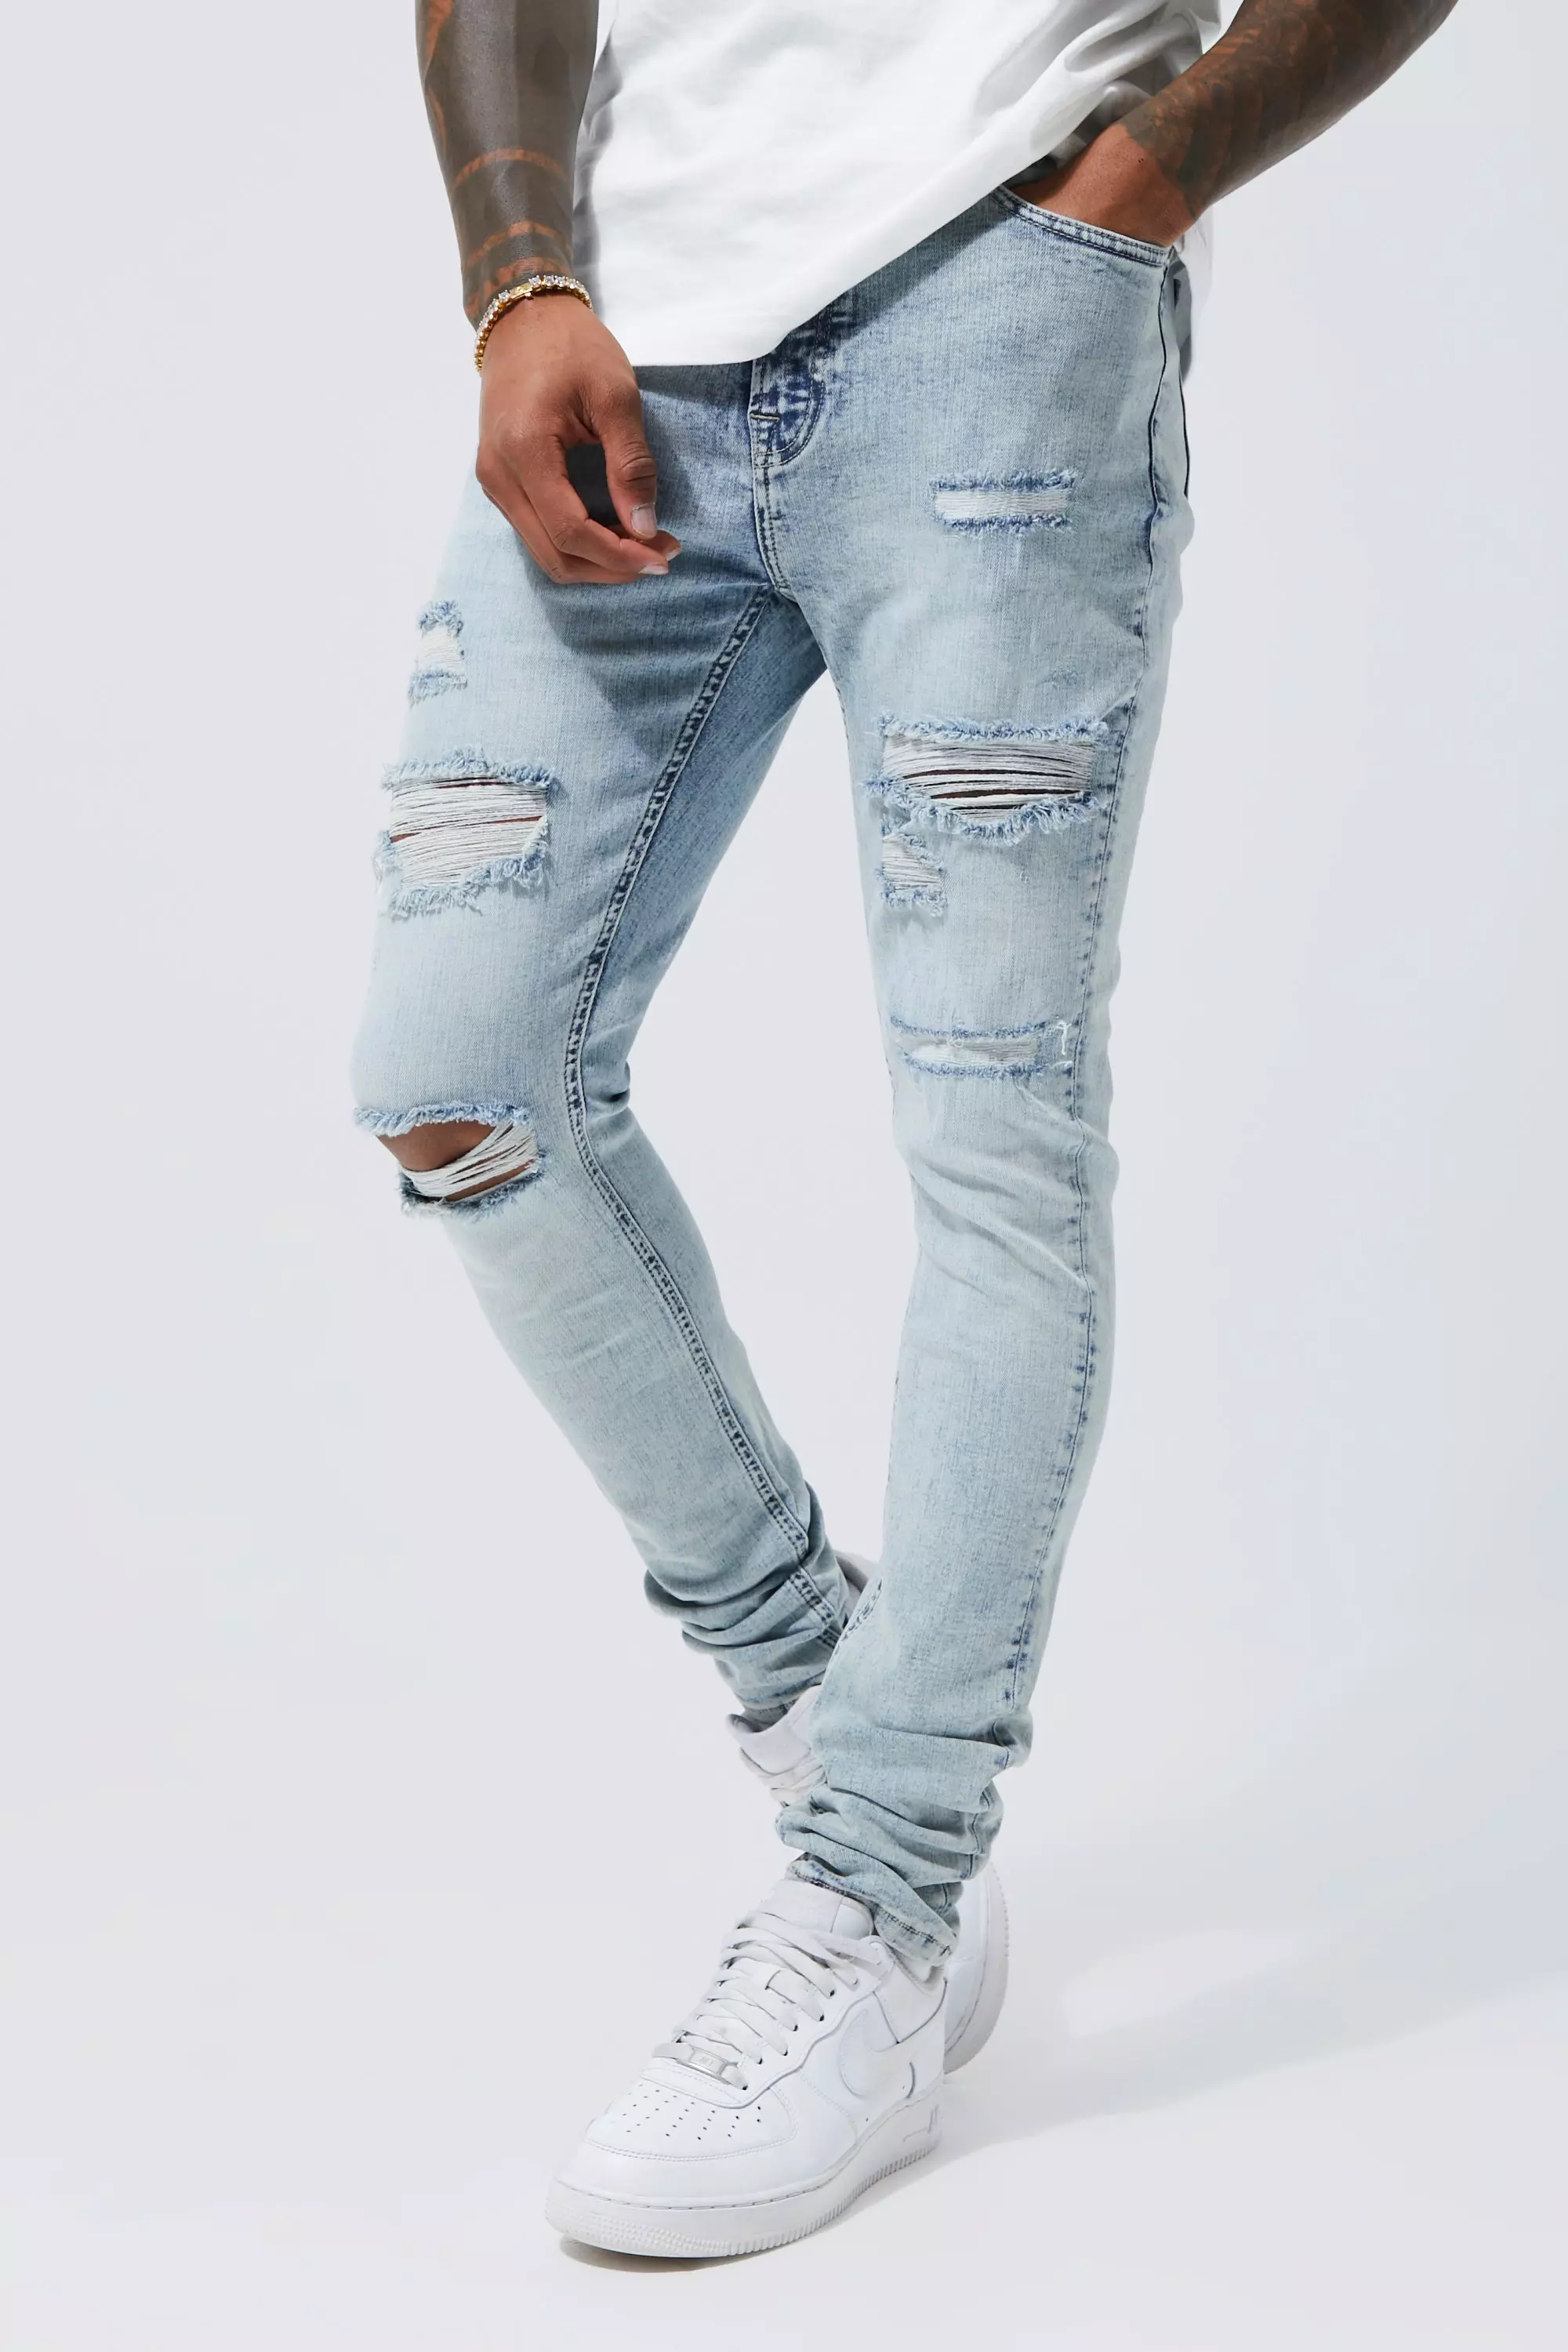 Men's Light Wash Stacked Skinny Jeans, Men's Clearance